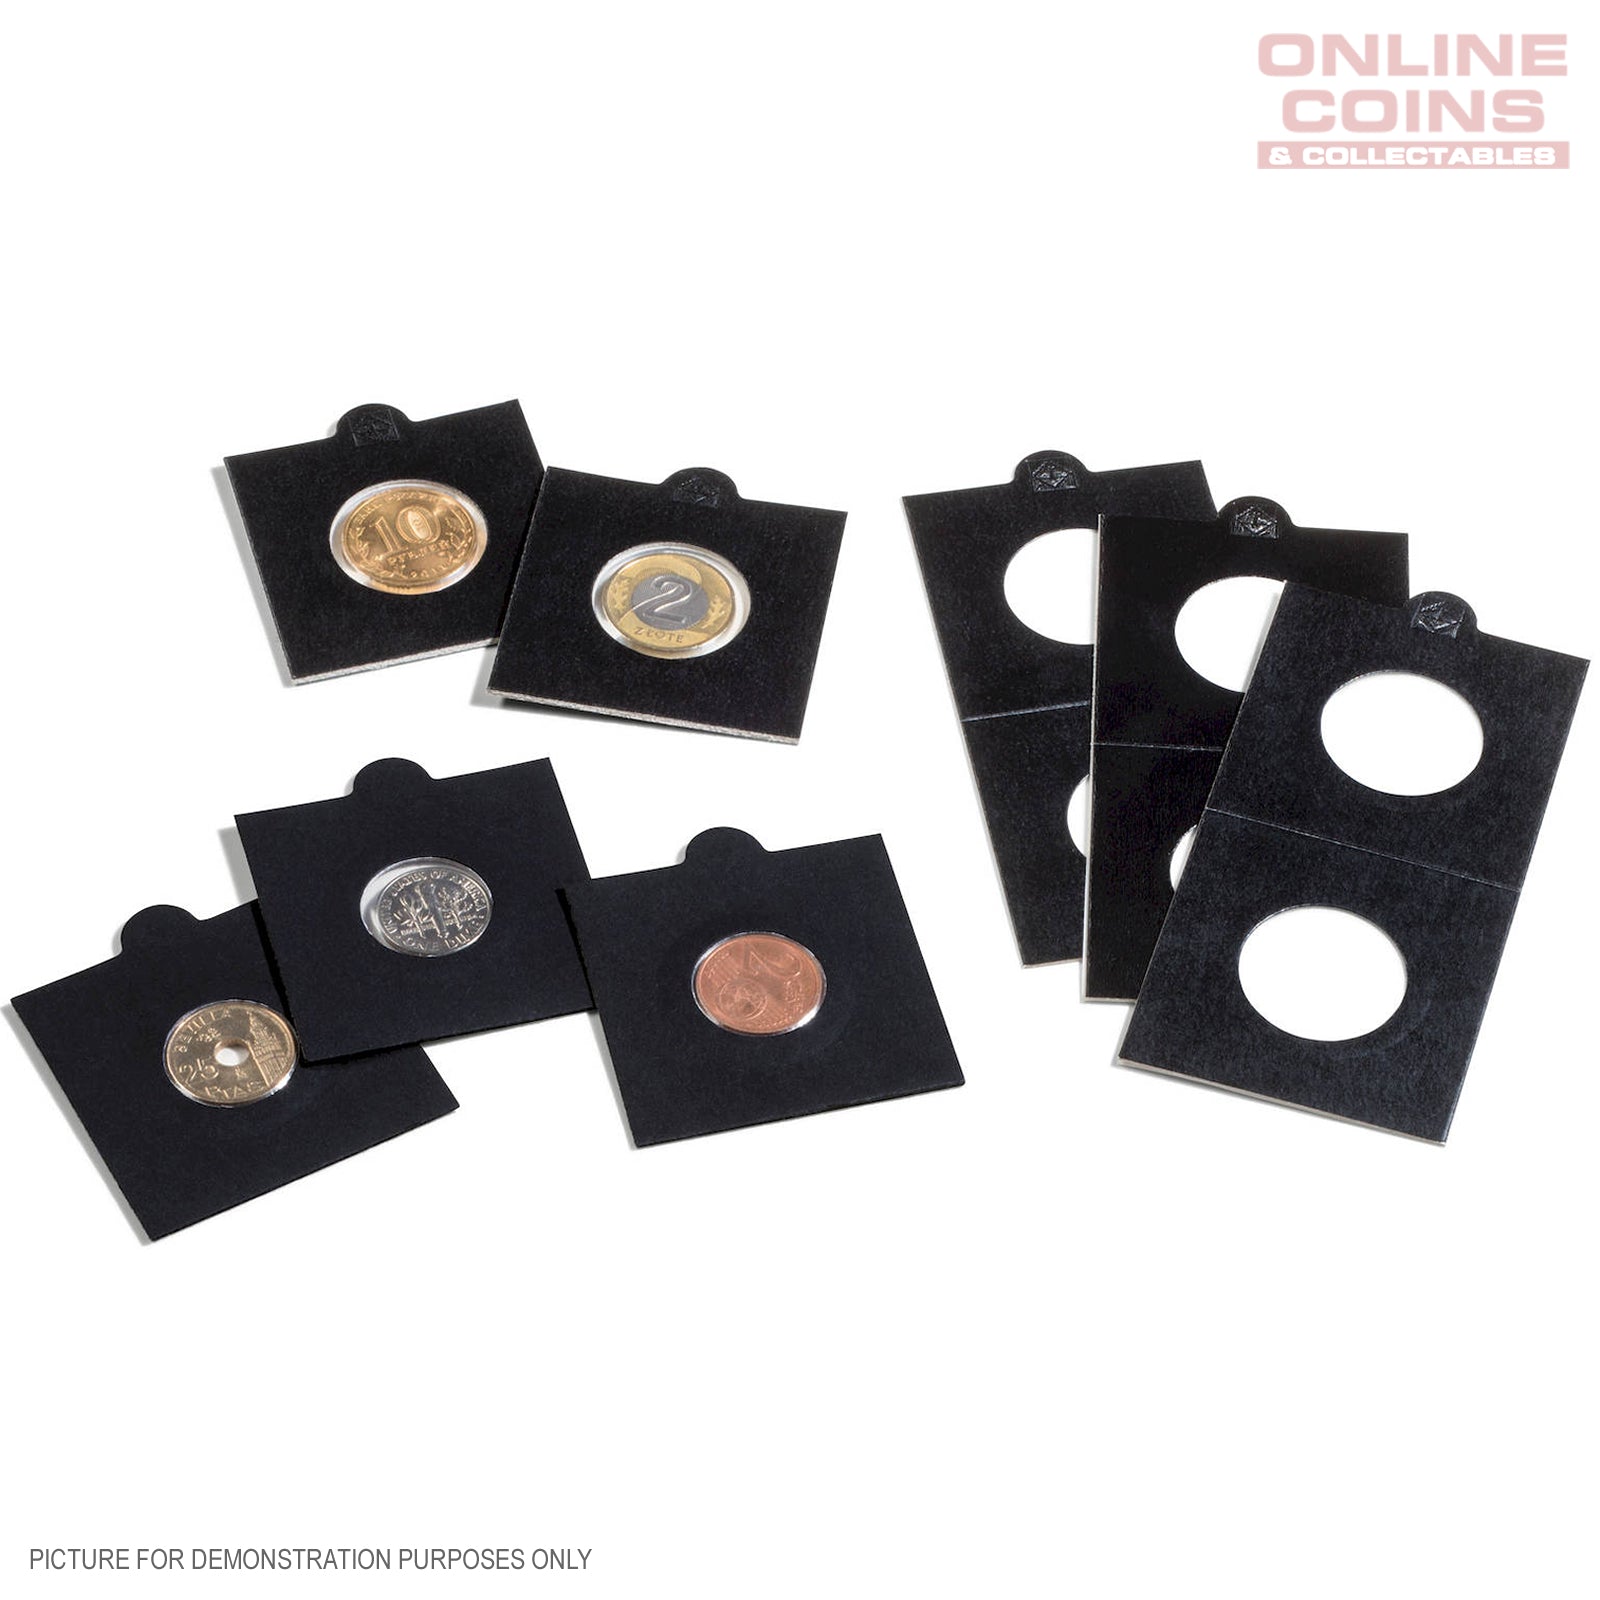 Lighthouse MATRIX BLACK 32.5mm Self Adhesive 2"x2" MATRIX Coin Holders x 25 (Suitable For Australian ROUND 50c Coins And Pennies)